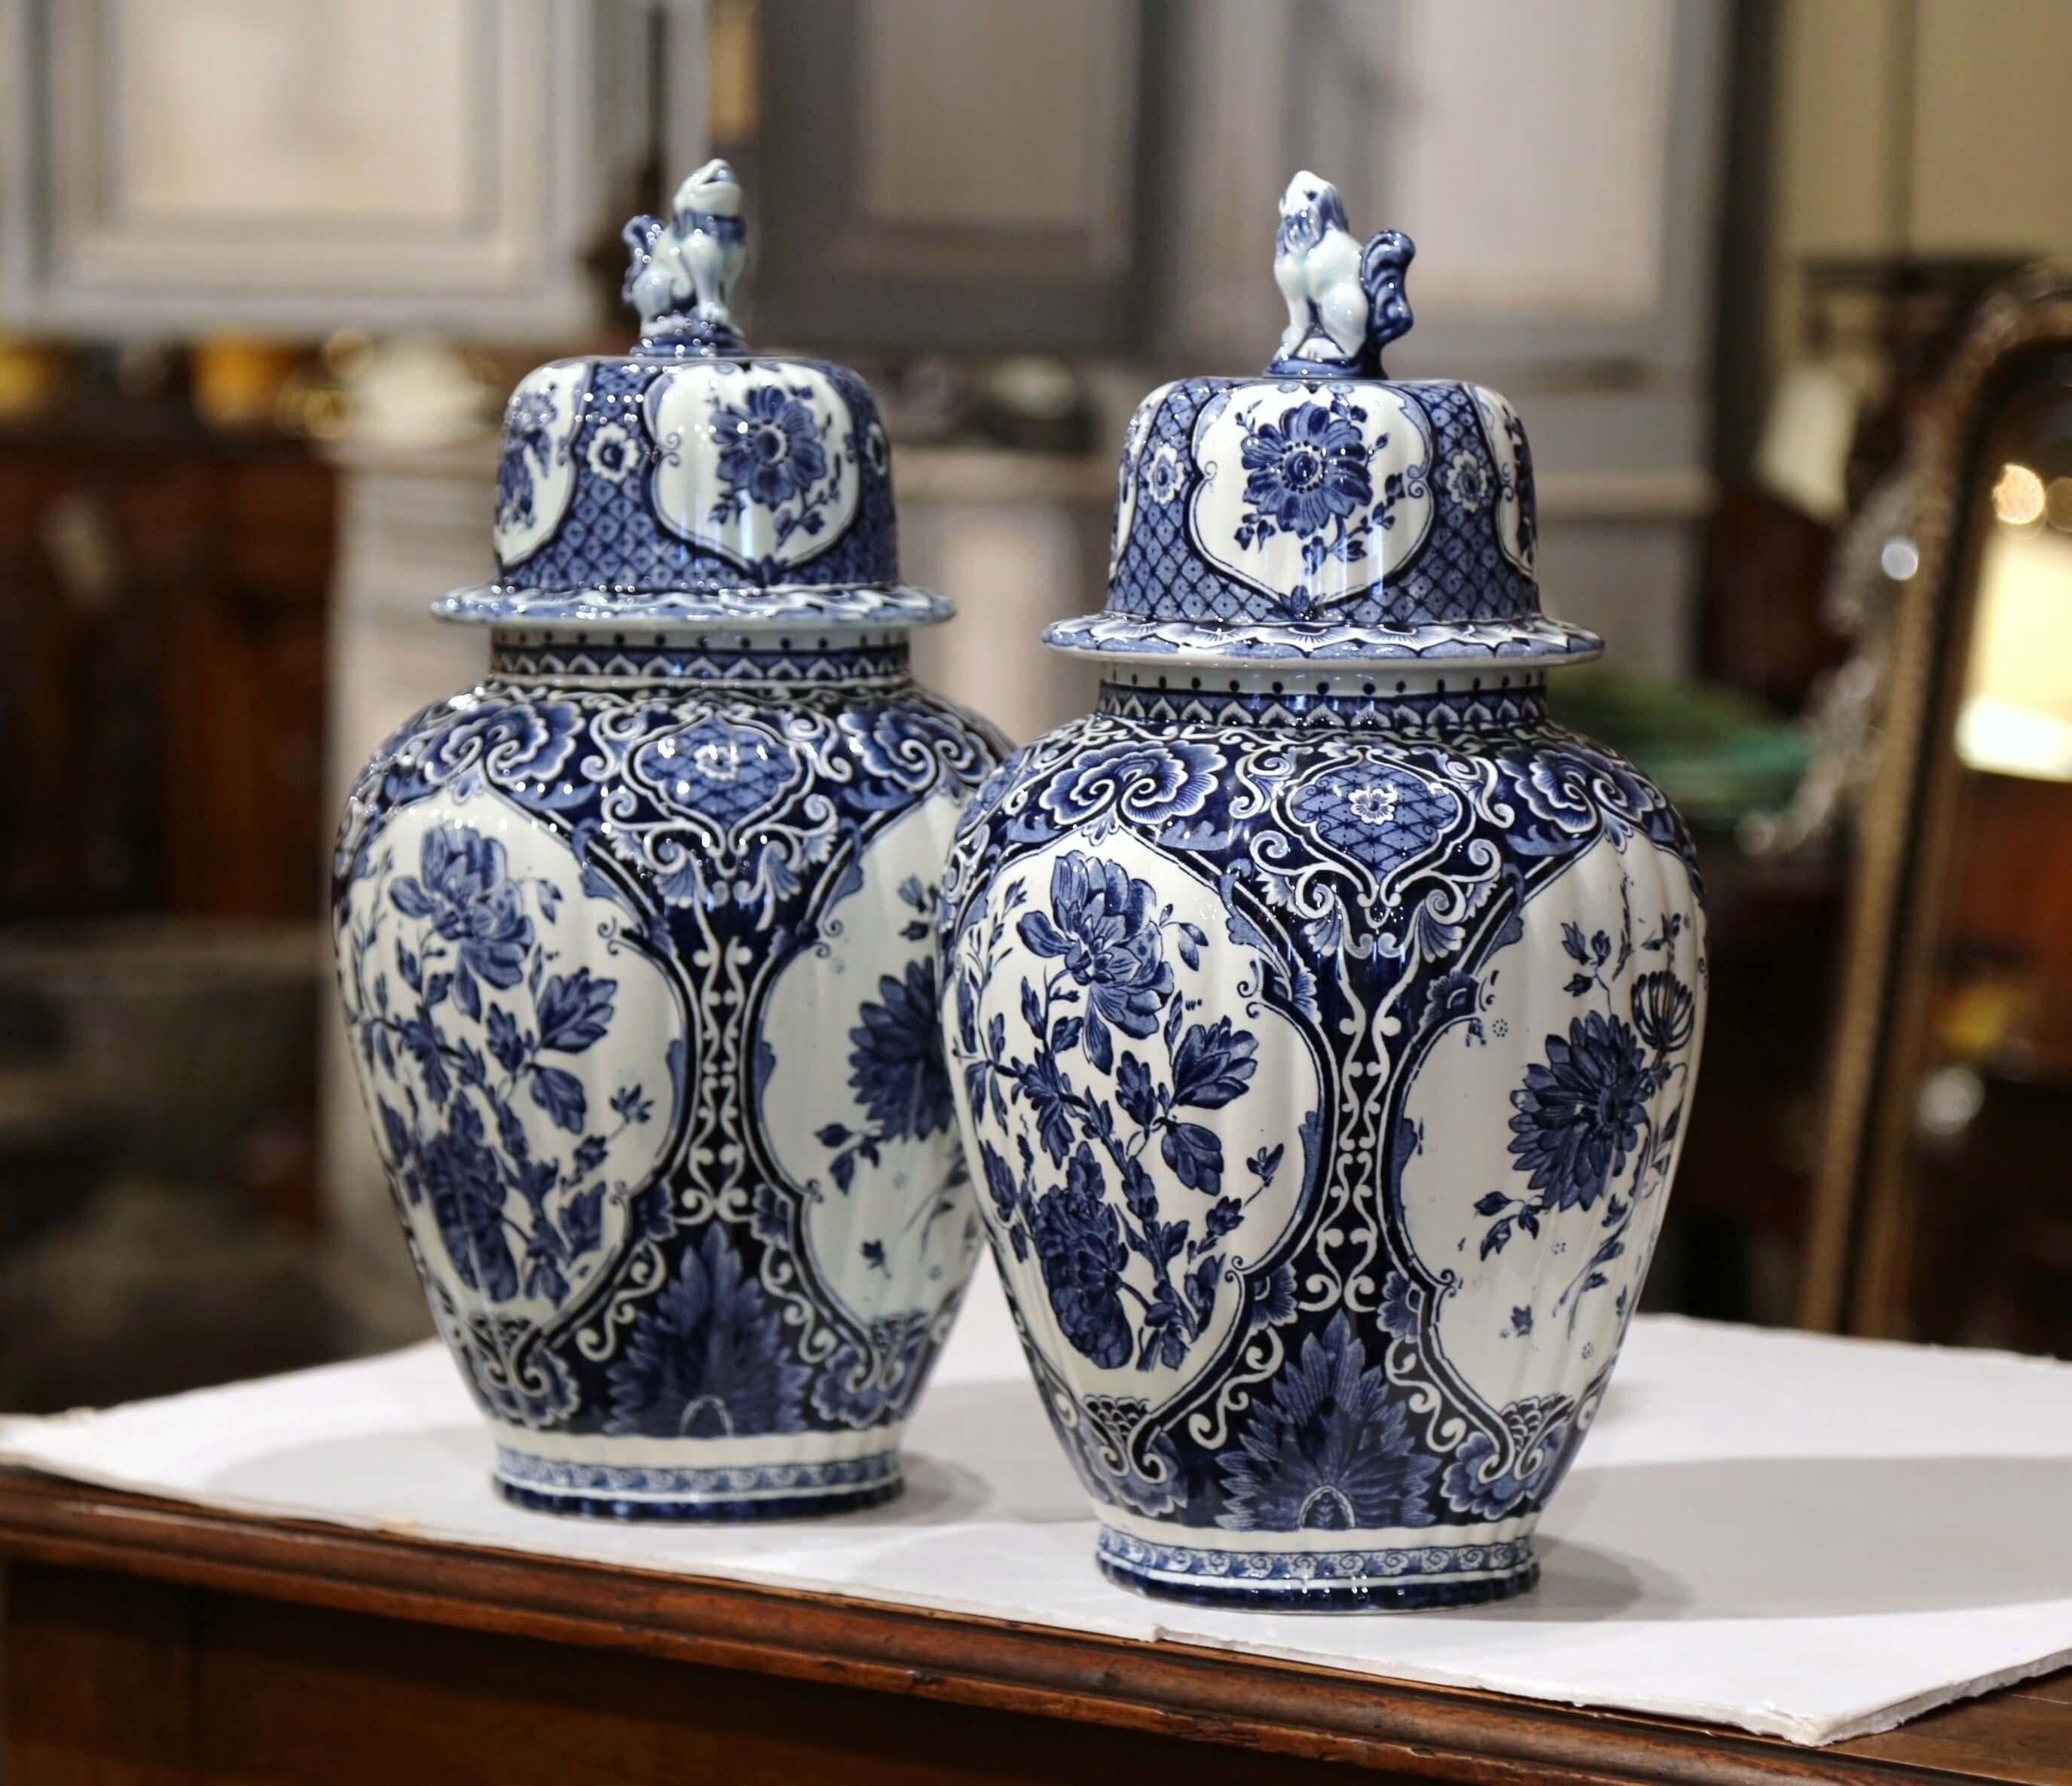 Created in Holland, circa 1960, the faience potiches feature hand painted medallions with Classic Dutch flowers and foliage. Signed delfts, the traditional blue and white jars have a dome lid embellished with dog figure at the top, and are stamped